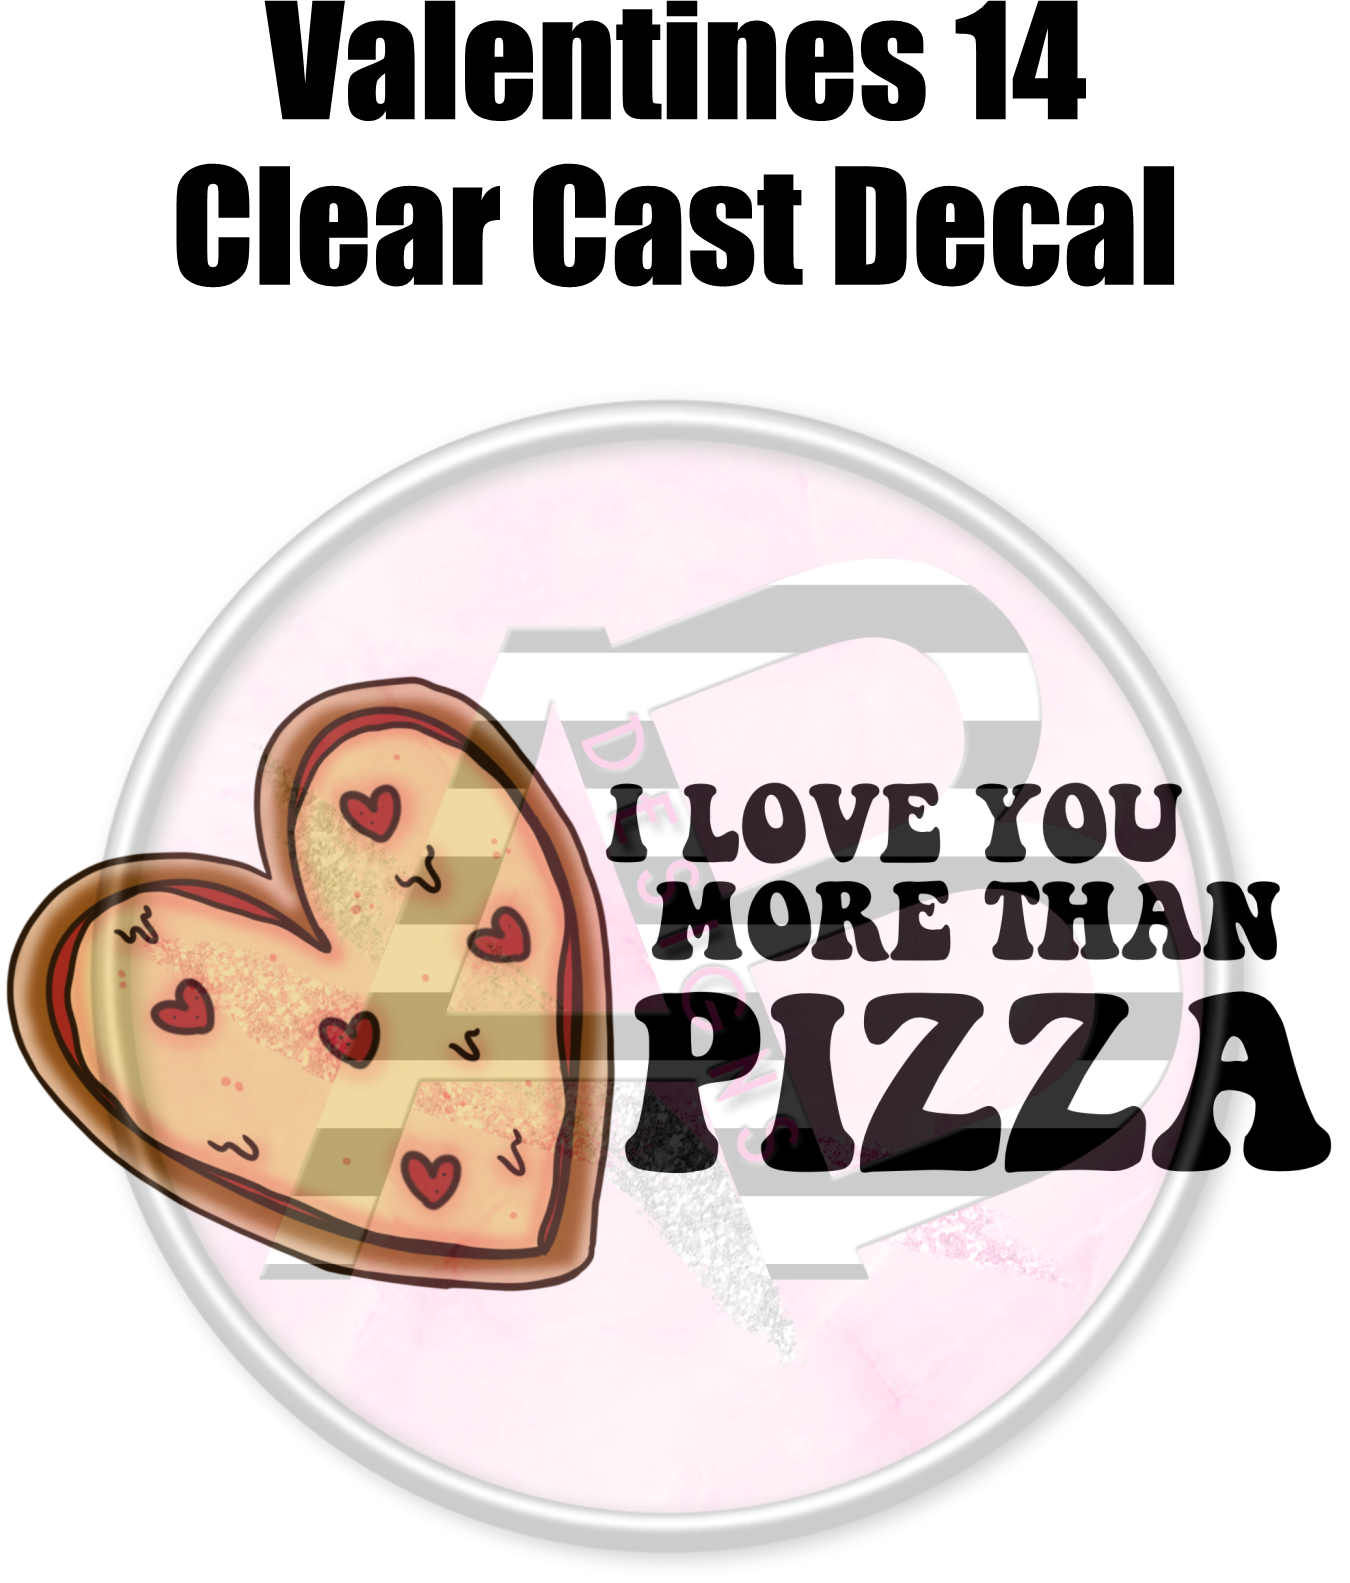 Valentines 14 - Clear Cast Decal